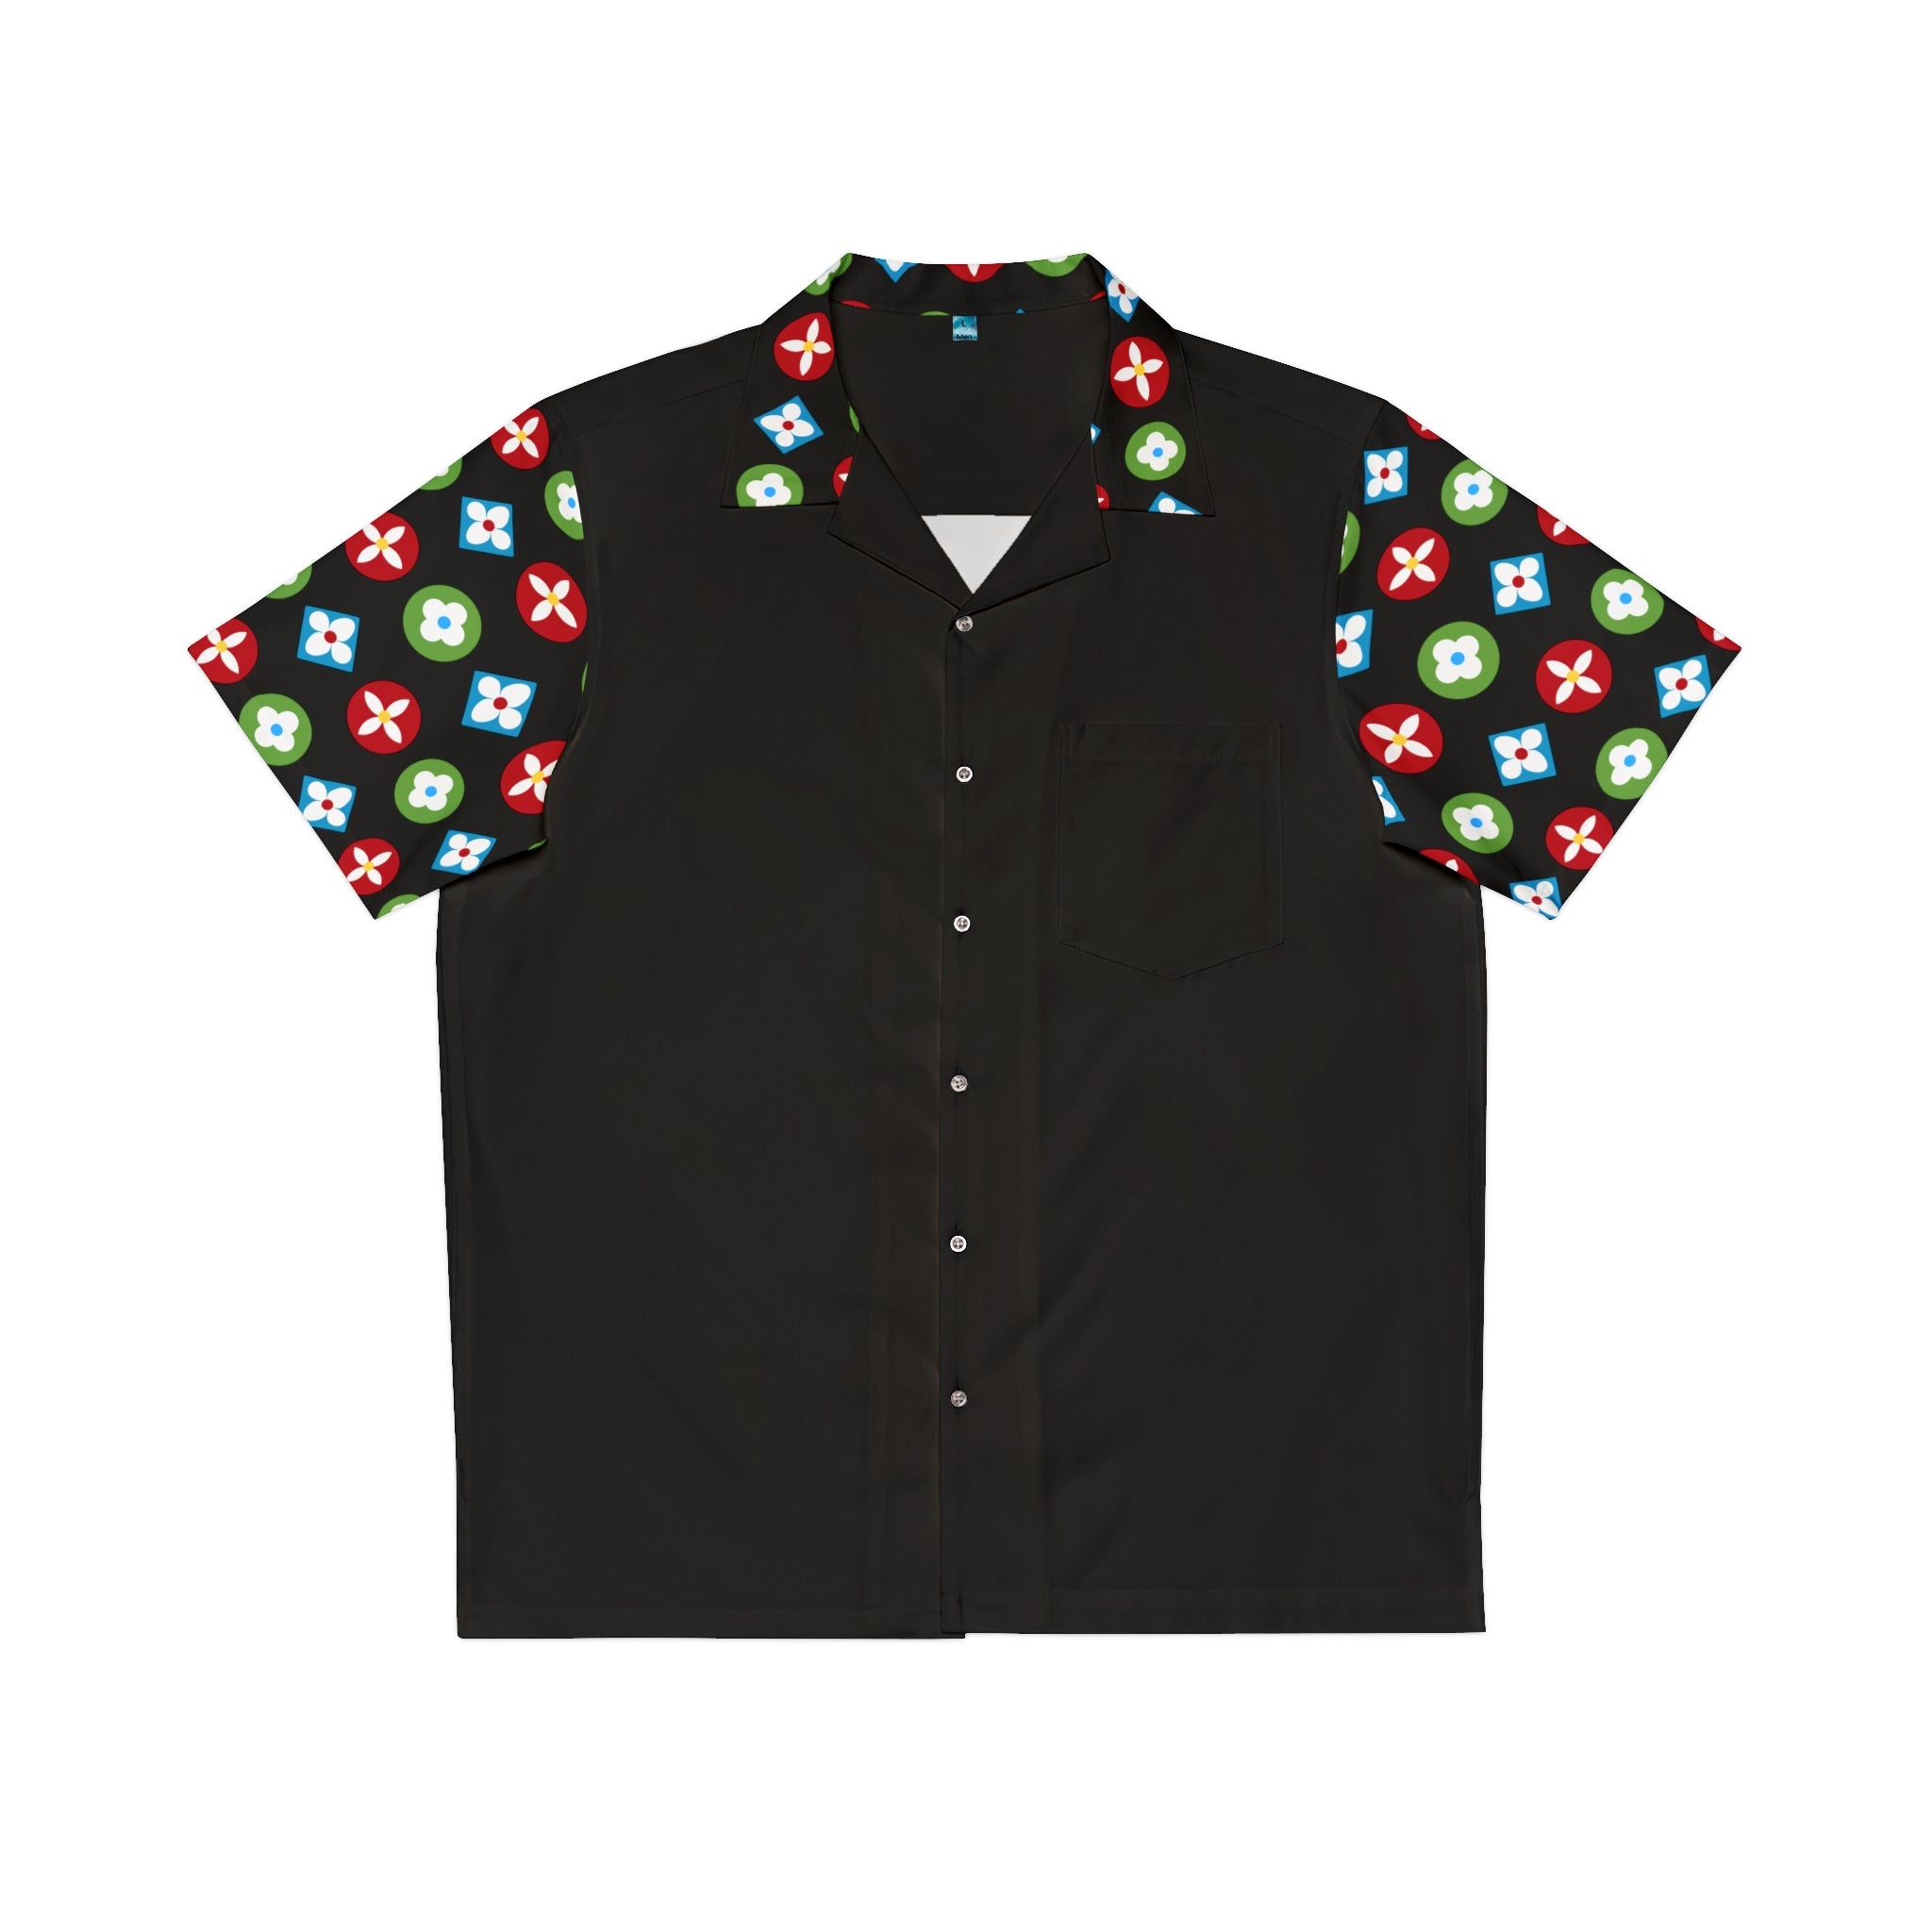  Groove Collection Trilogy of Icons Solid Block (Red, Green, Blue) Black Unisex Gender Neutral Button Up Shirt, Hawaiian Shirt Men's Shirts5XLWhite